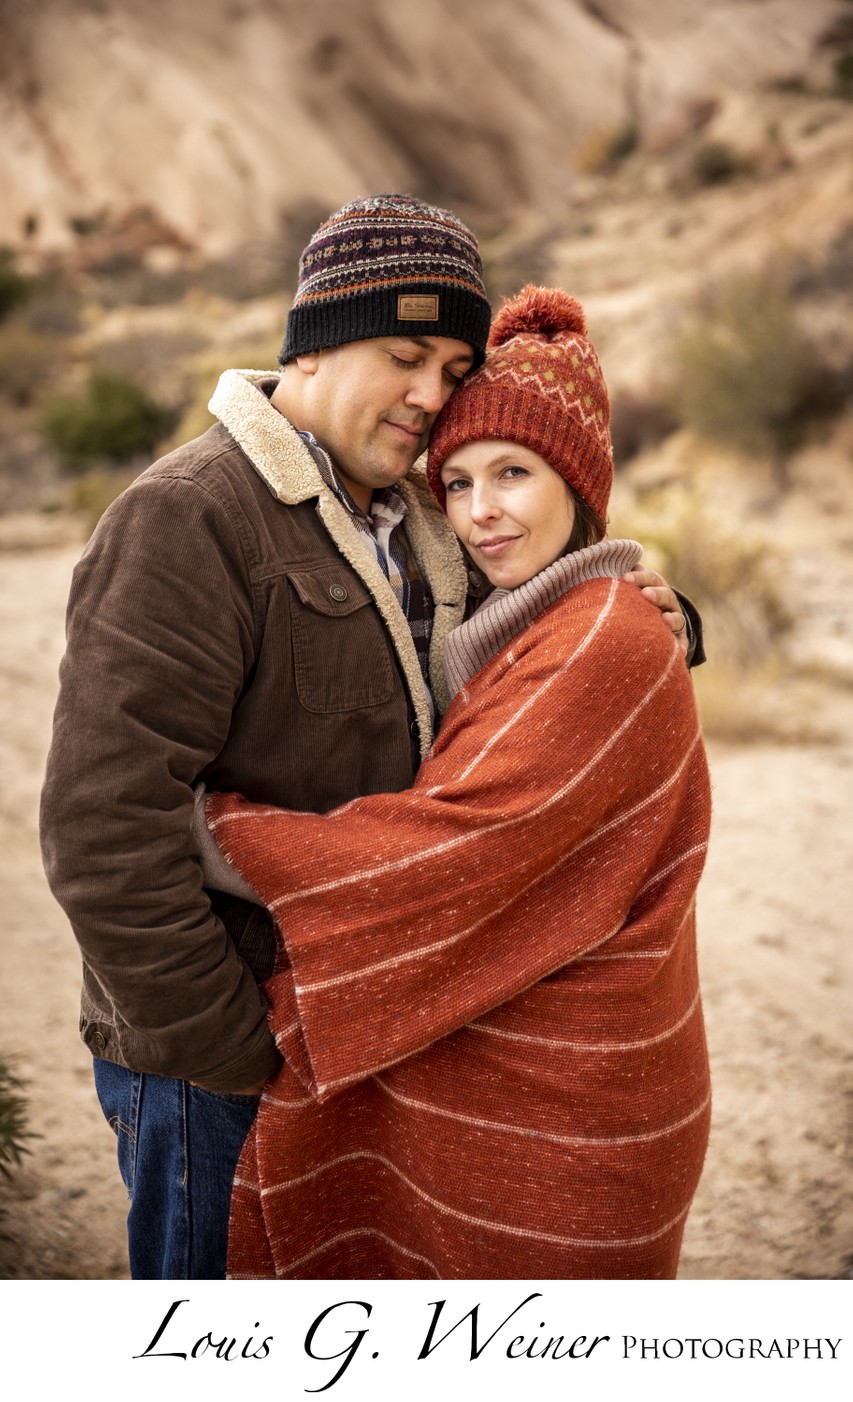 Desert family portraits with Louis G Weiner Photography